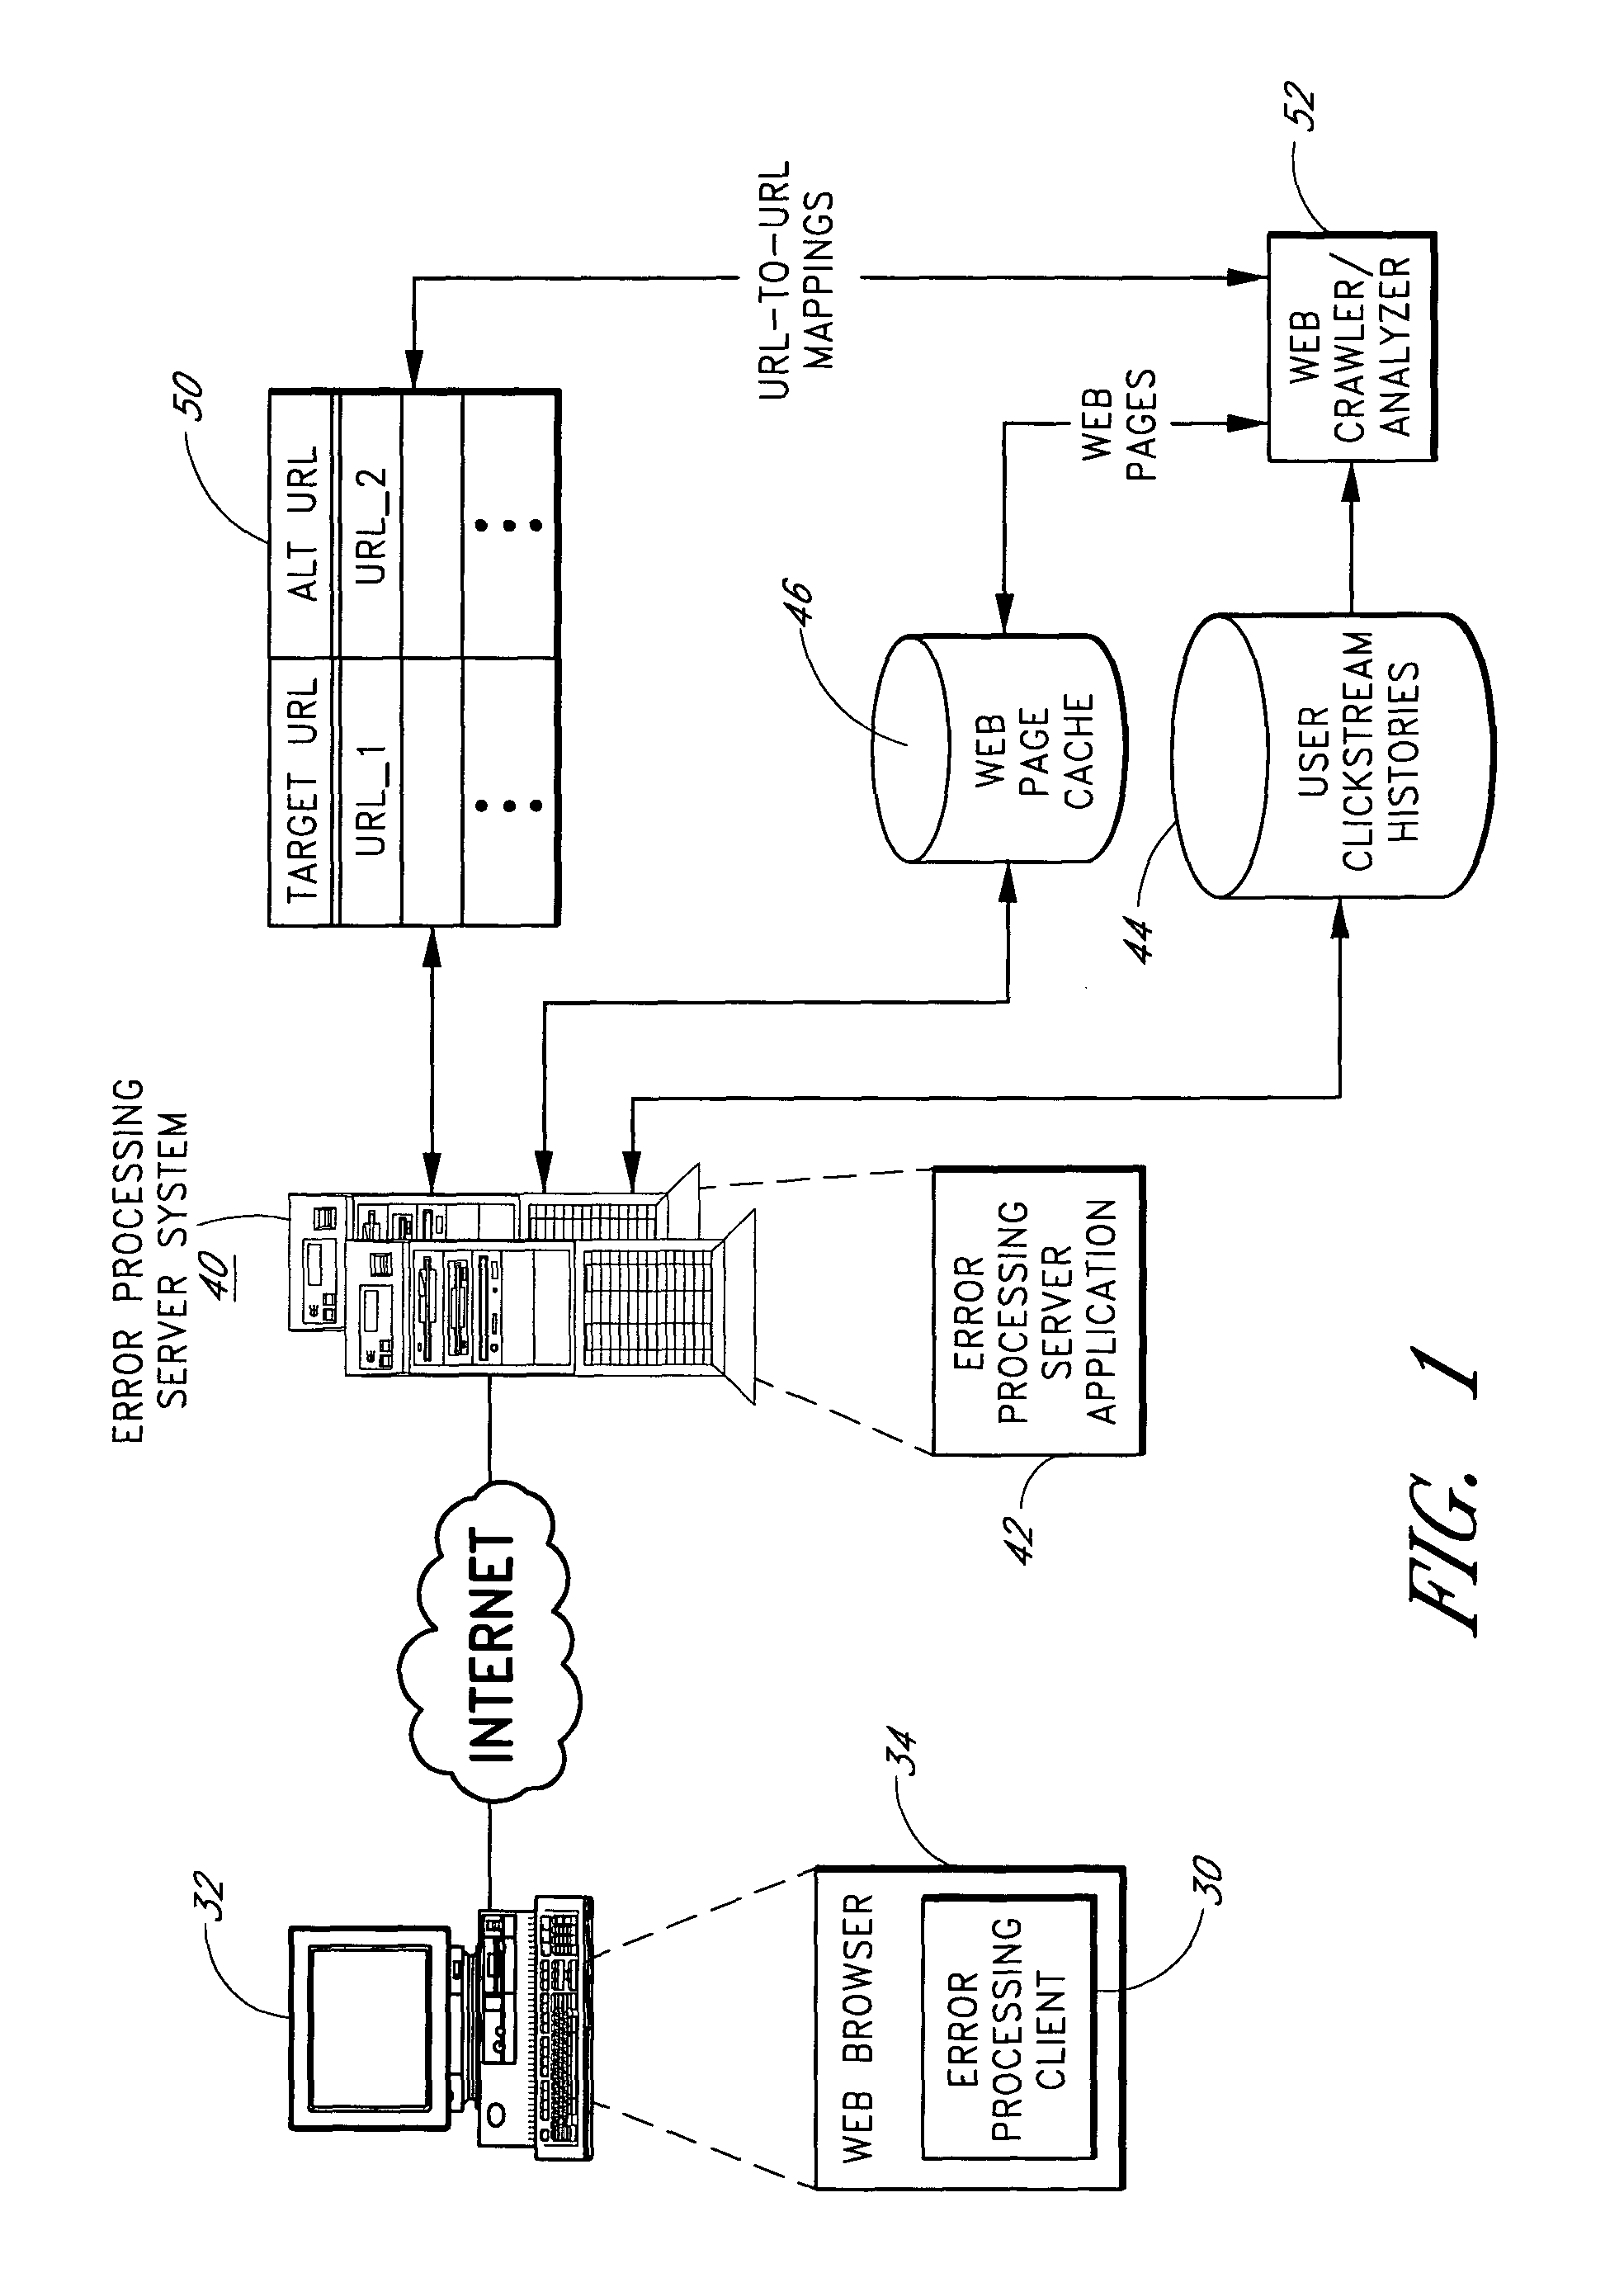 Error processing methods for providing responsive content to a user when a page load error occurs